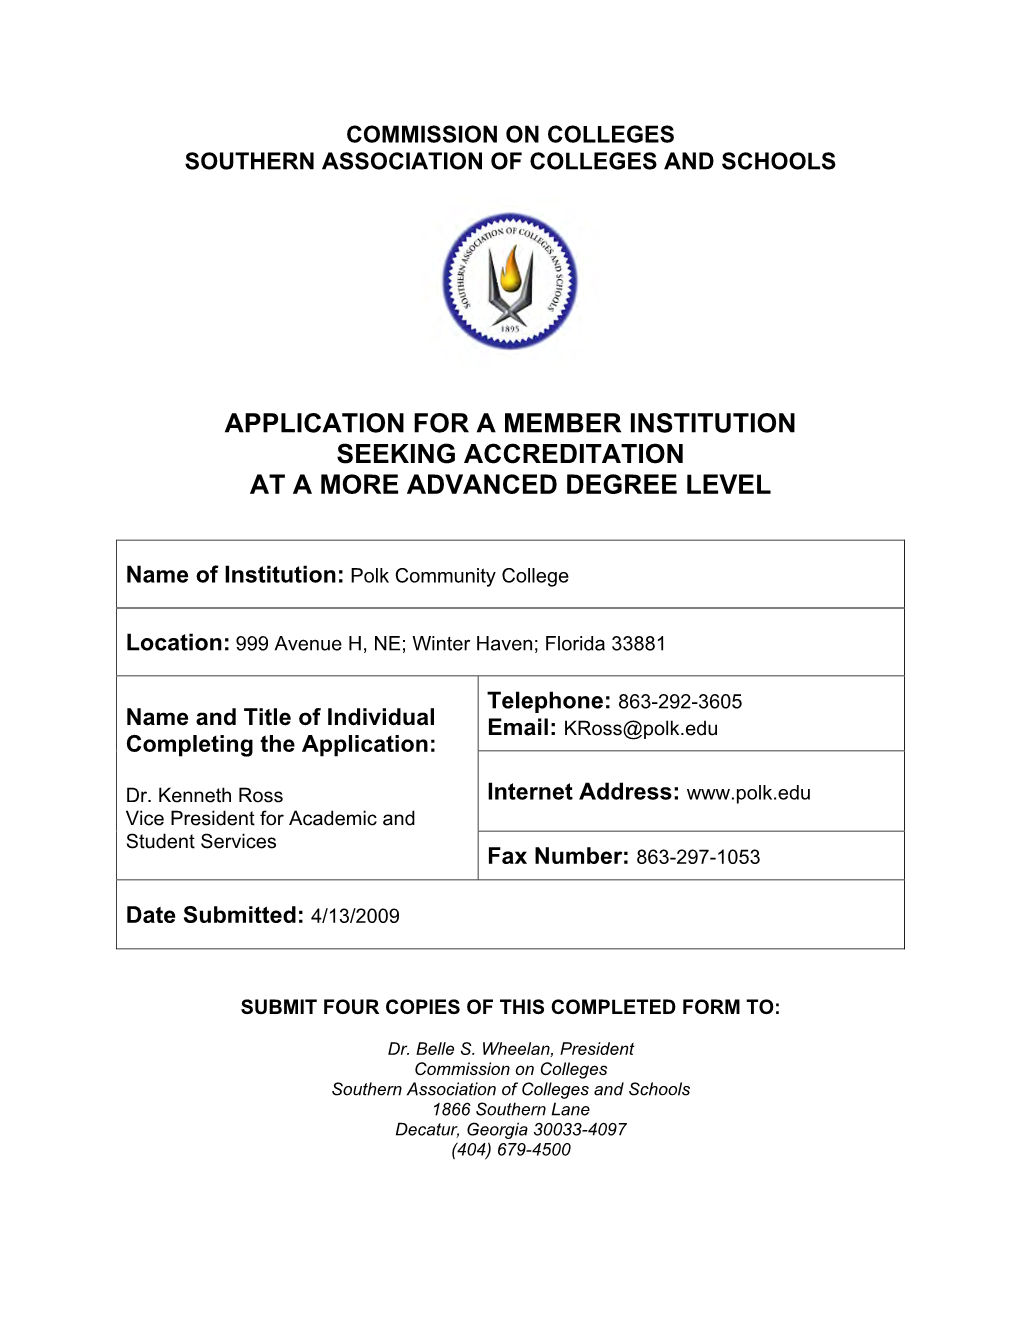 Application for a Member Institution Seeking Accreditation at a More Advanced Degree Level